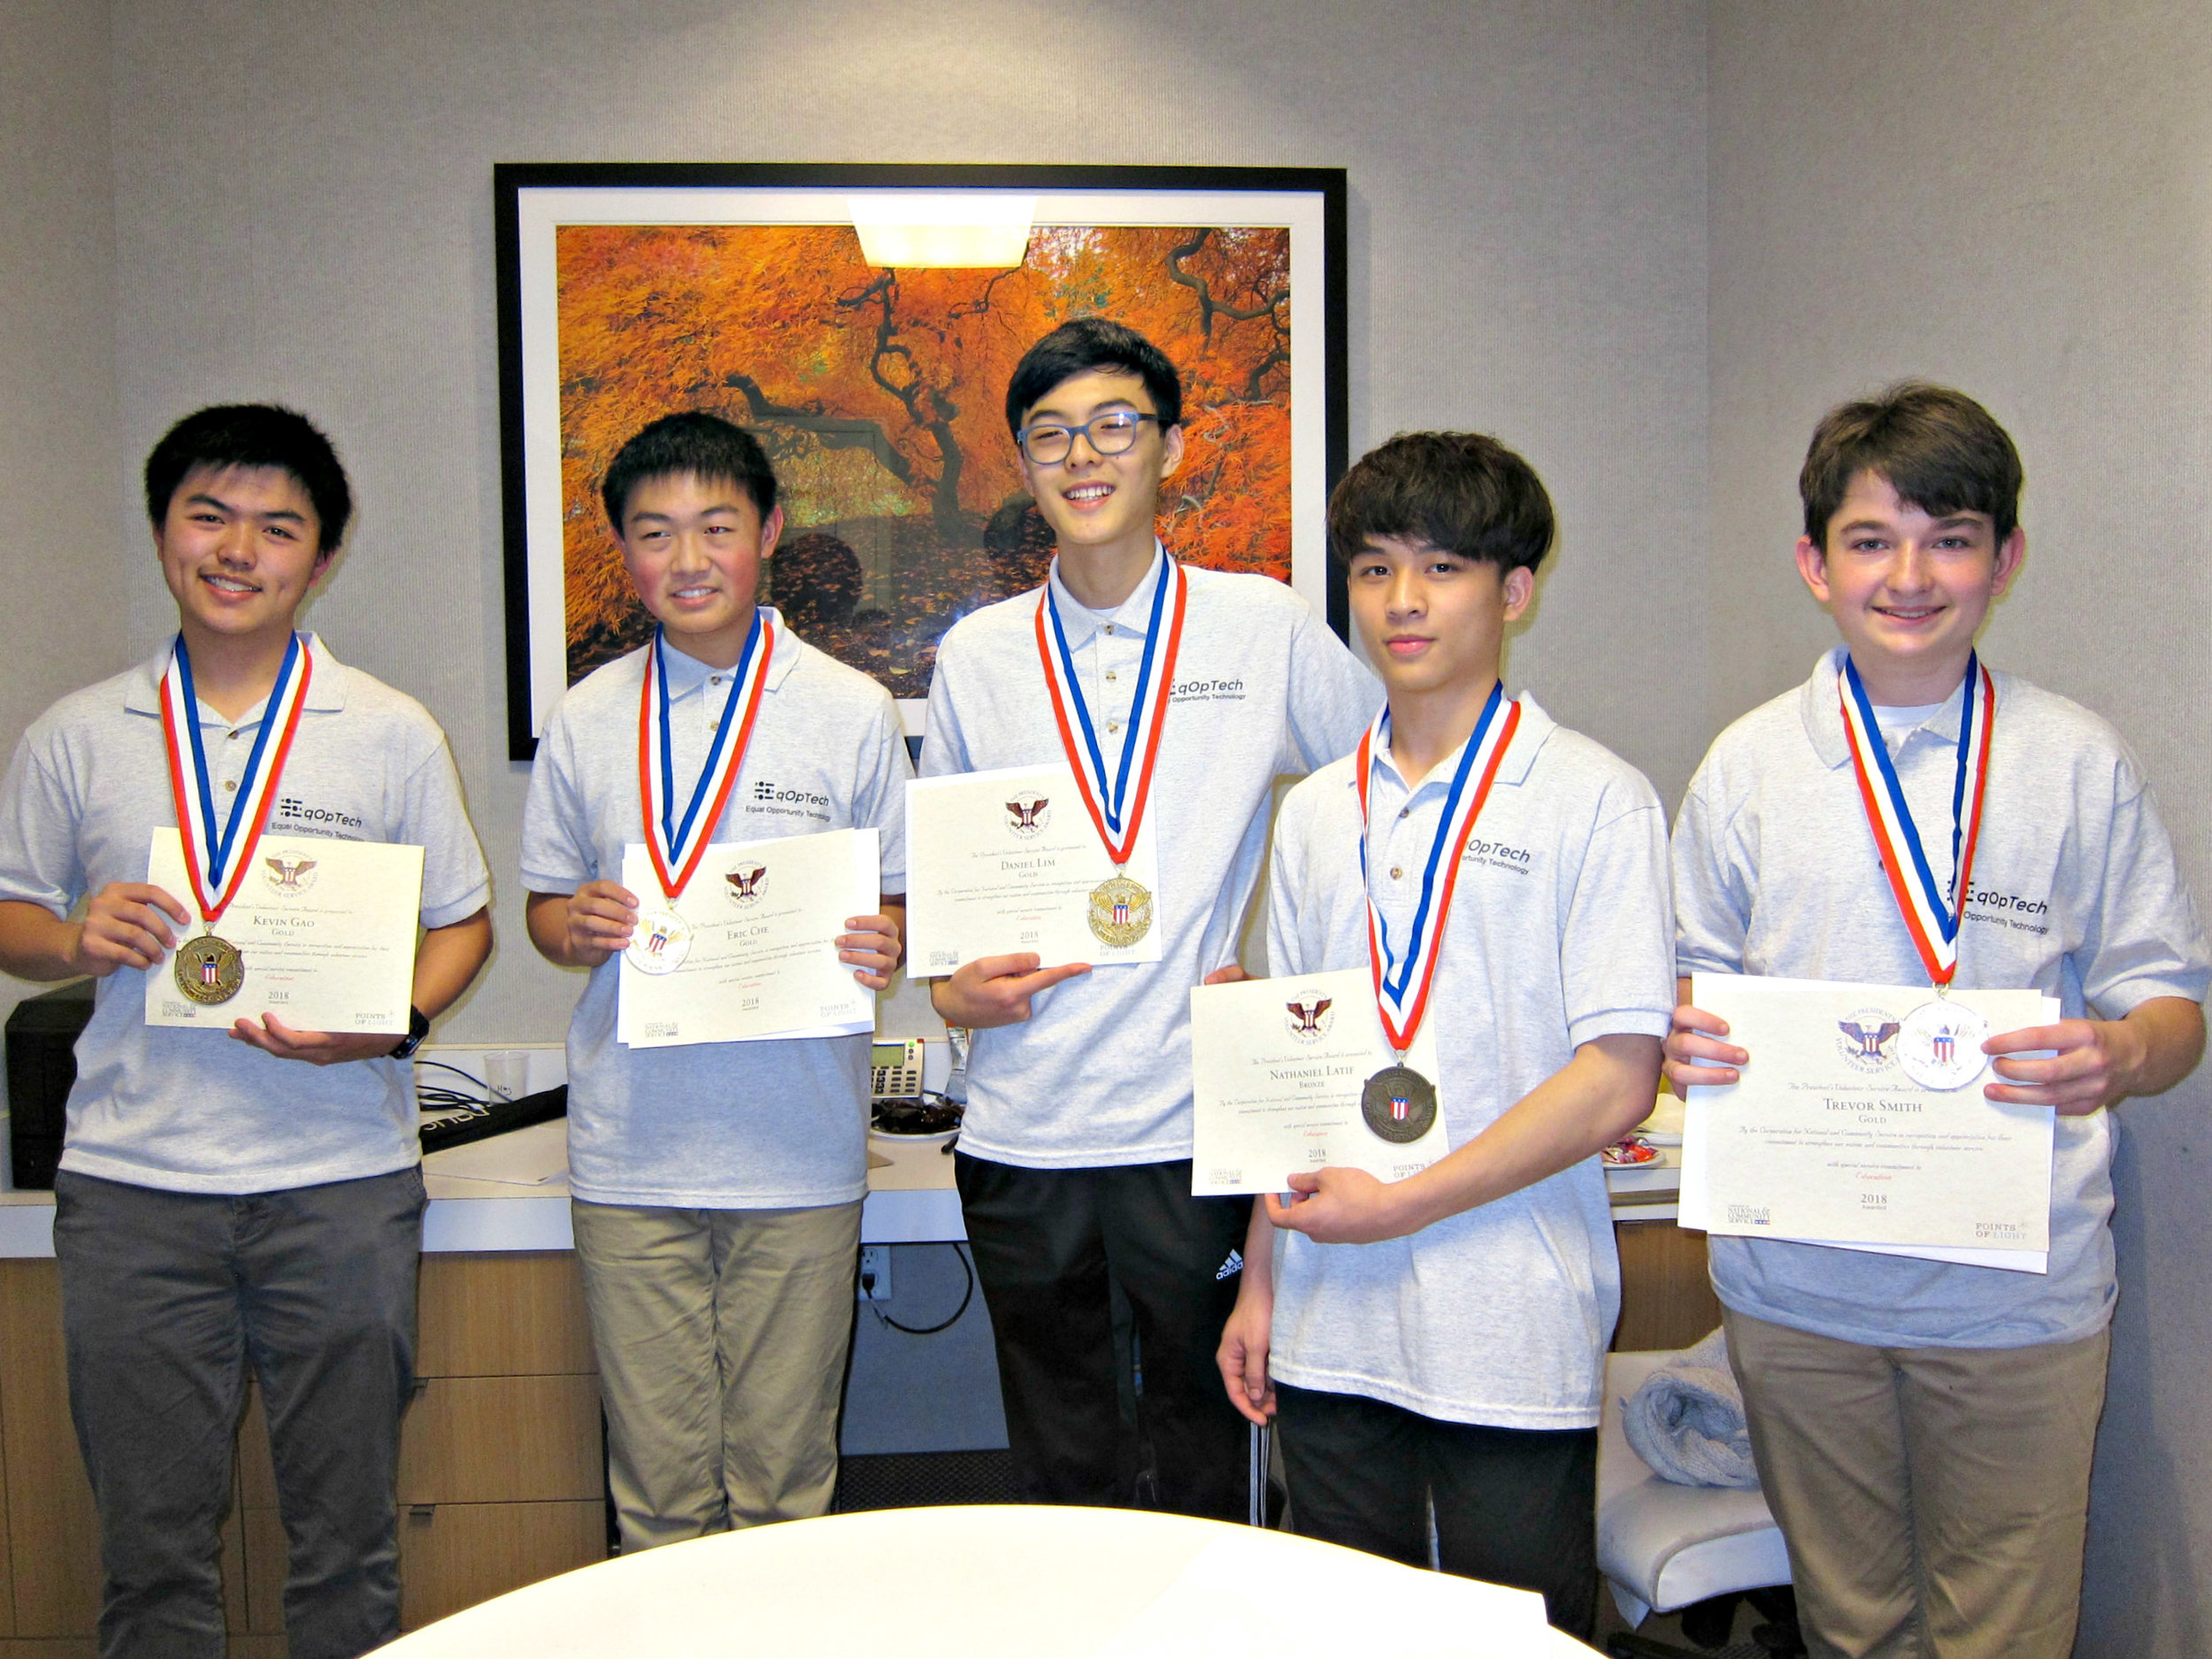 2018 PVSA Medalists - Kevin Gao, Eric Che, Daniel Lim, Nate Latif, Trevor Smith (left to right)